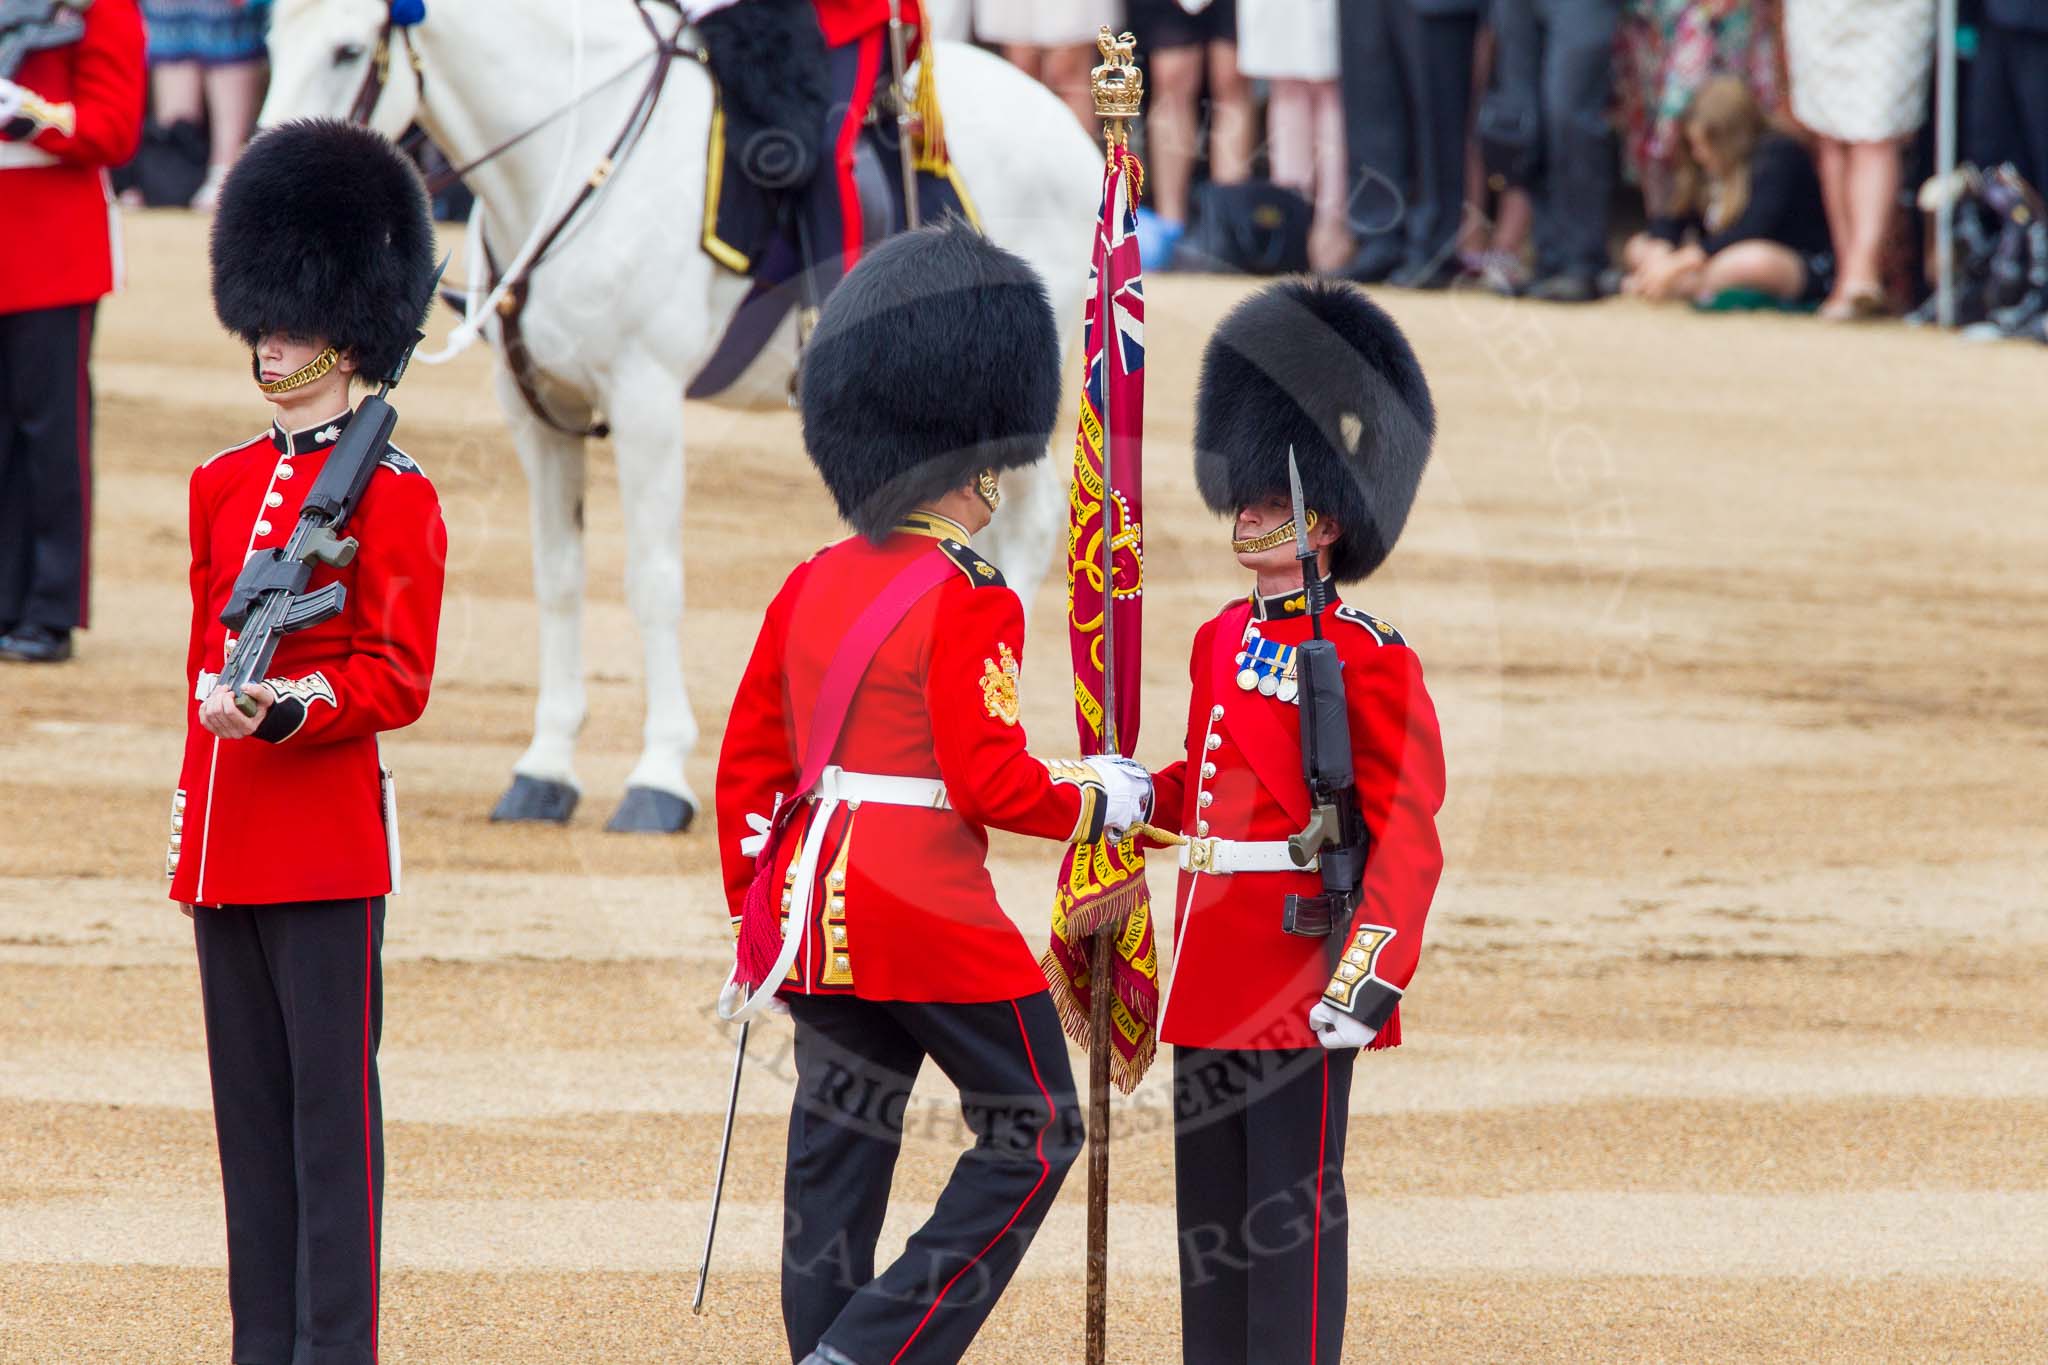 Trooping the Colour 2014.
Horse Guards Parade, Westminster,
London SW1A,

United Kingdom,
on 14 June 2014 at 11:21, image #526